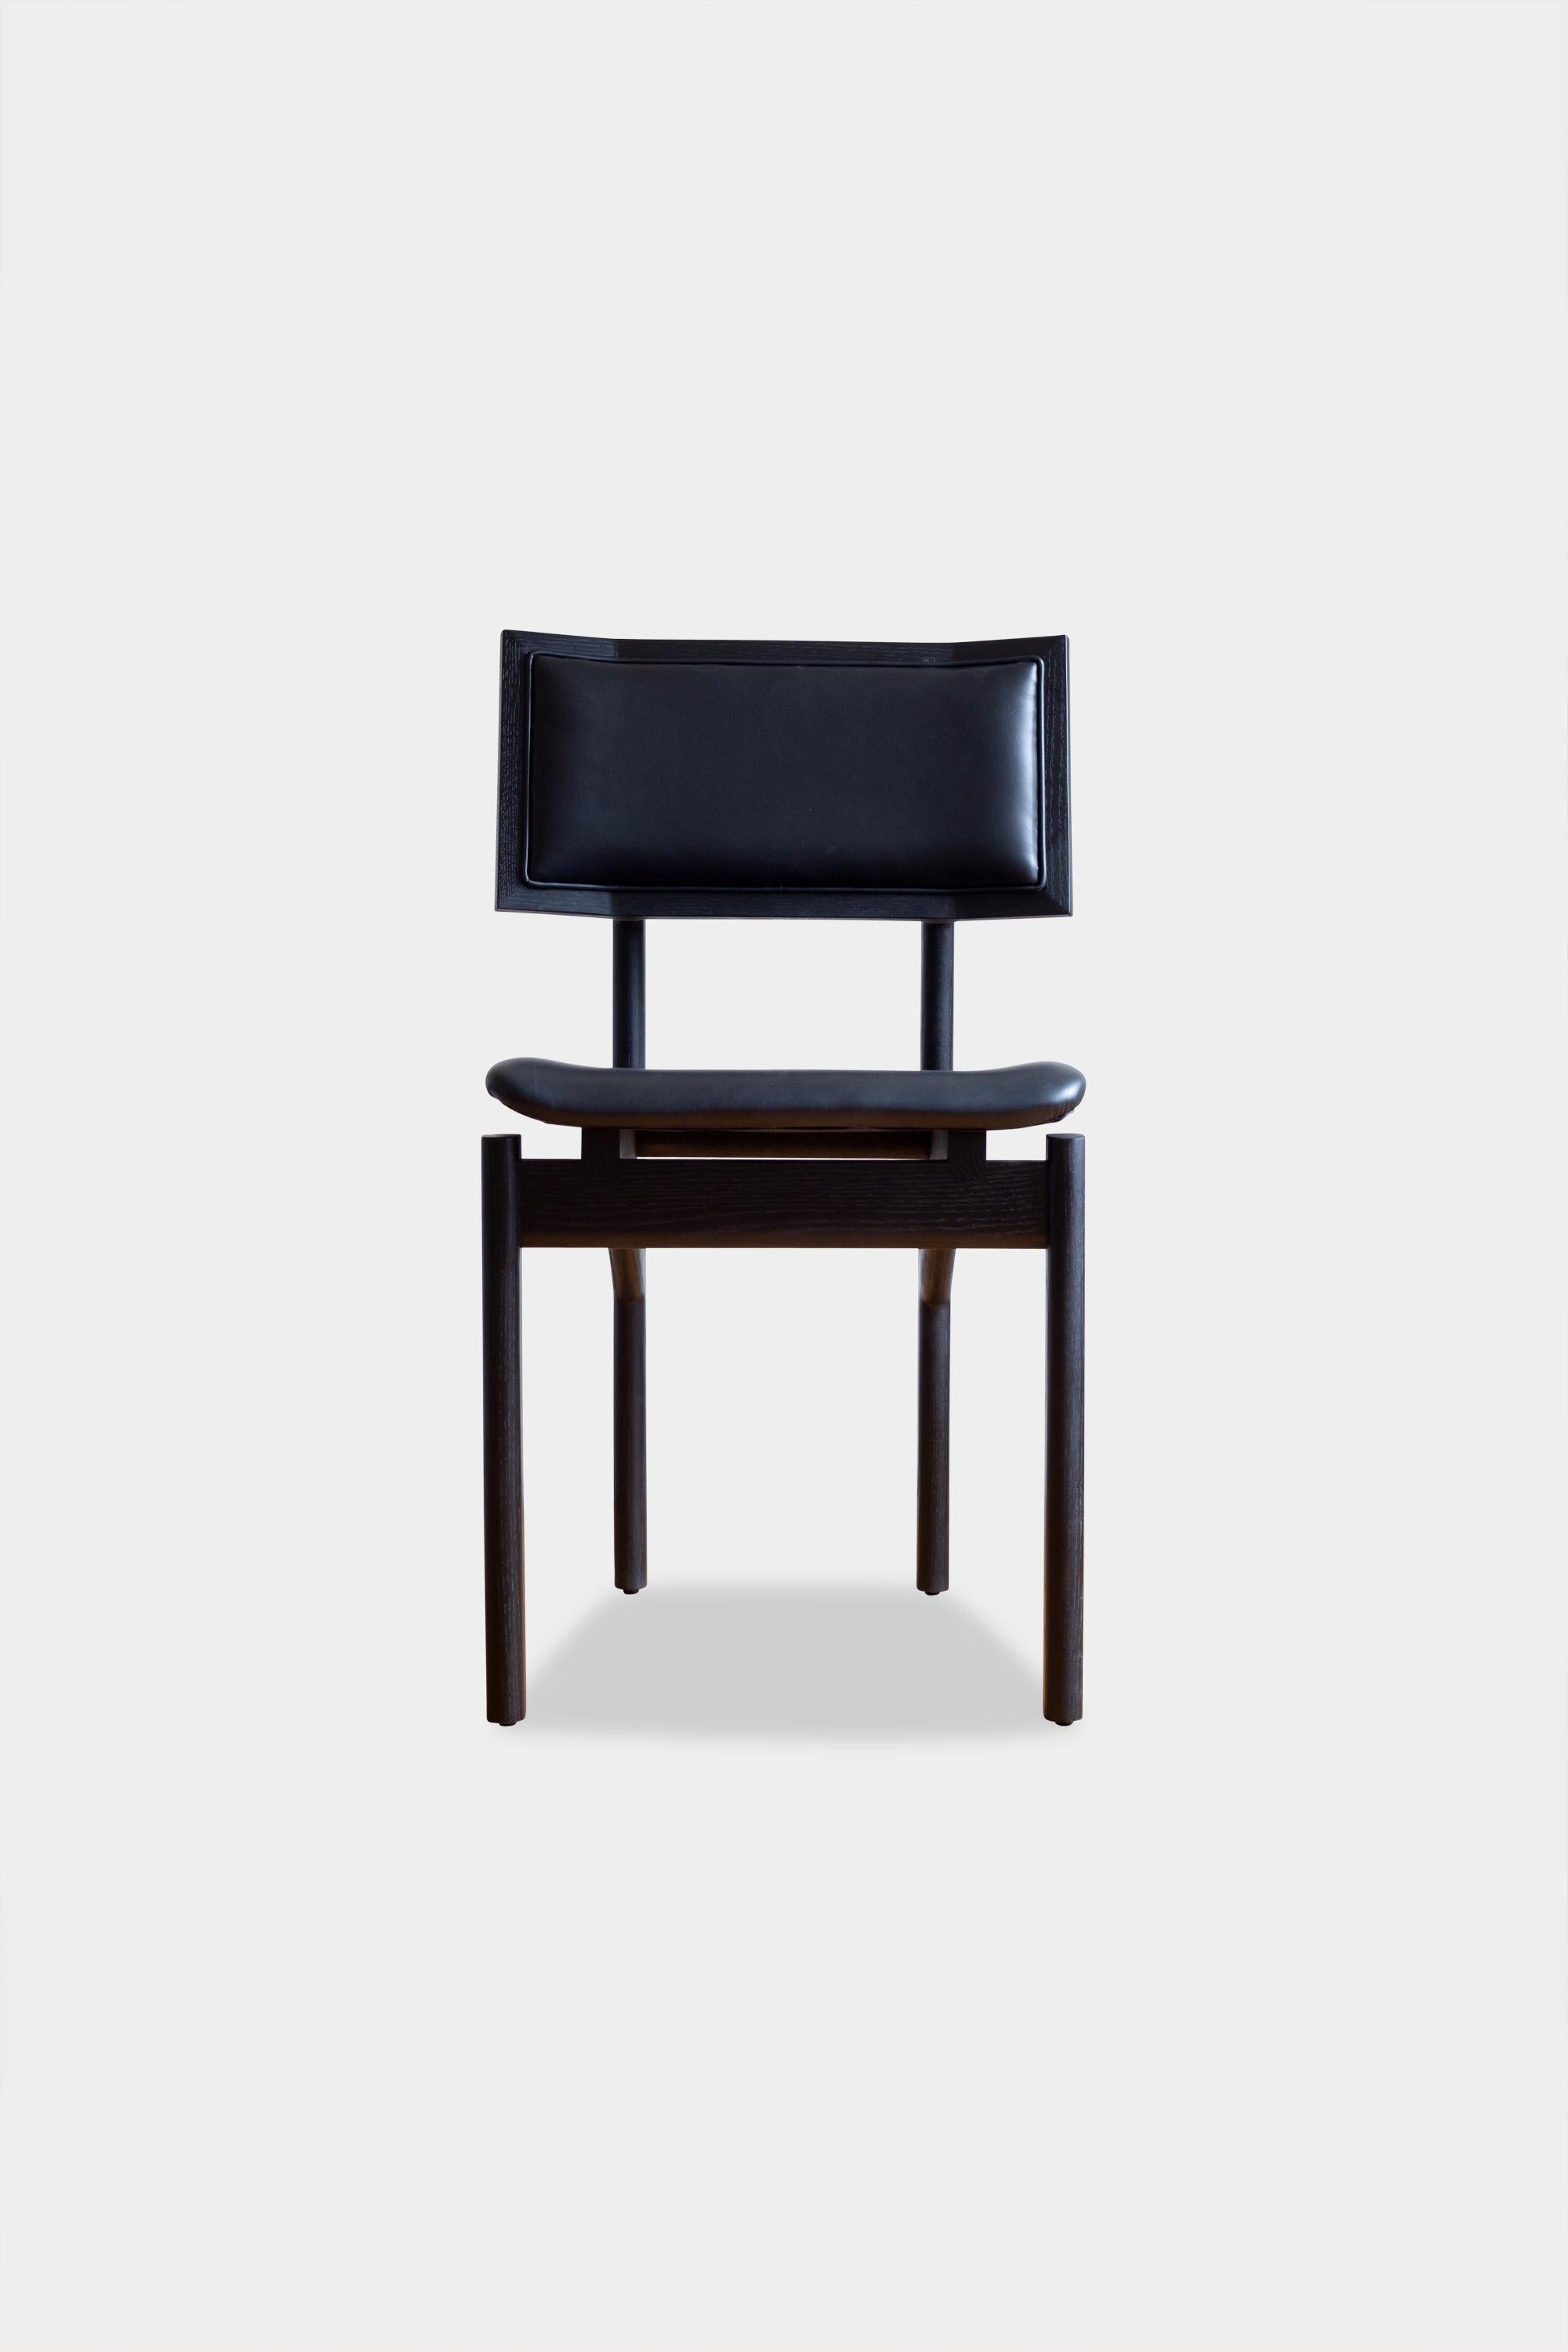 Solid wood constructed dining chair available in any American domestic hardwoods; specifically walnut, oak, ebonized oak, or ash. Featuring hand-shaped legs, a custom upholstered seat available in camel leather, olive leather, black leather, vegtan